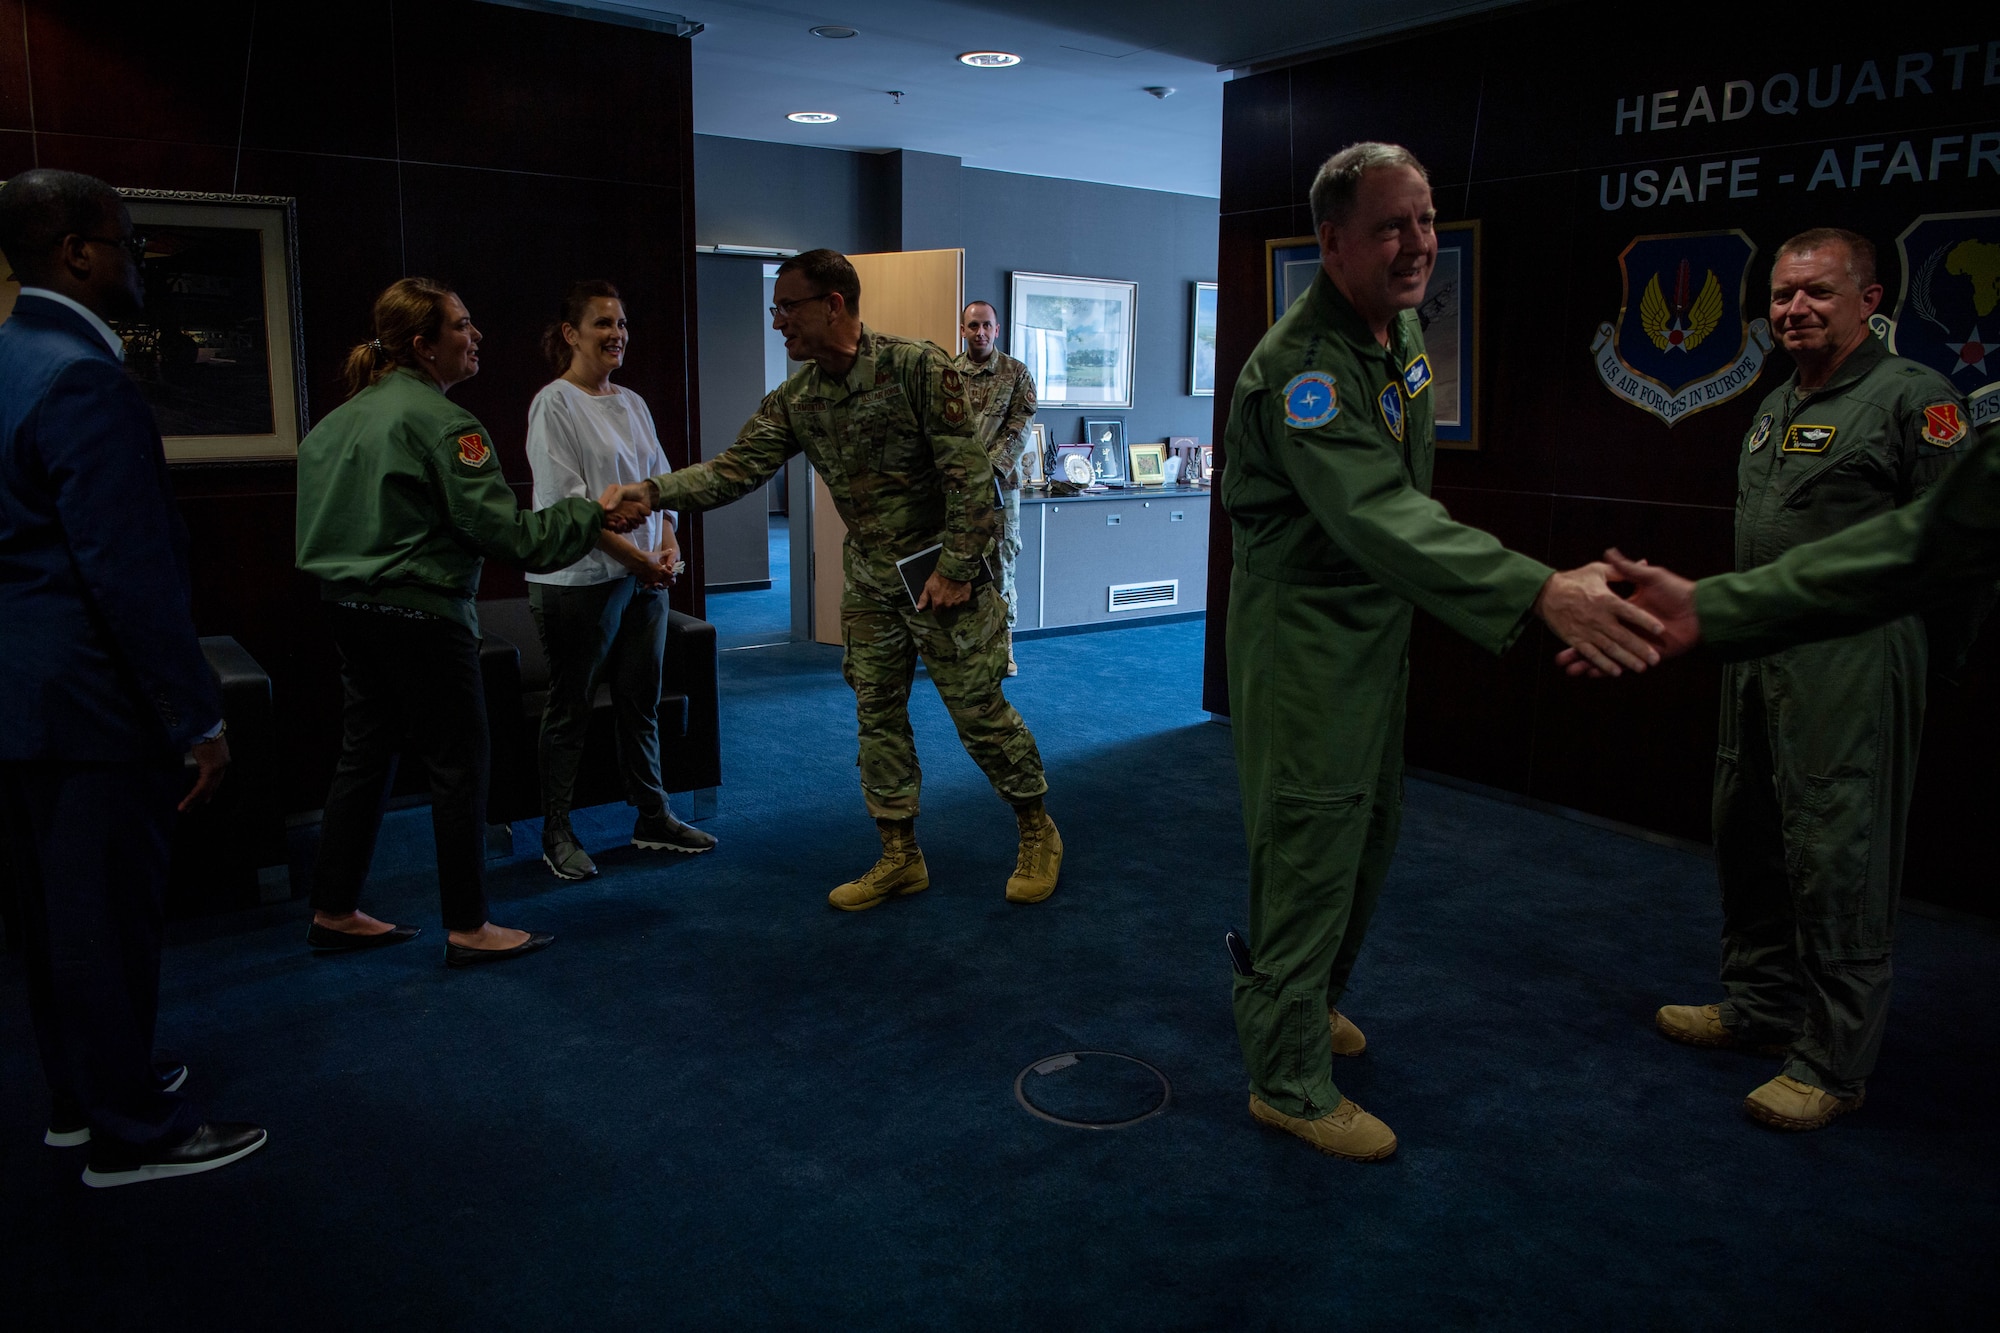 U.S. Air Force Gen. James B. Hecker, U.S. Air Forces in Europe and Air Forces Africa commander, front right, greets Michigan Gov. Gretchen Whitmer, back left, and her team during their tour at Ramstein Air Base, Germany, June 22, 2023.